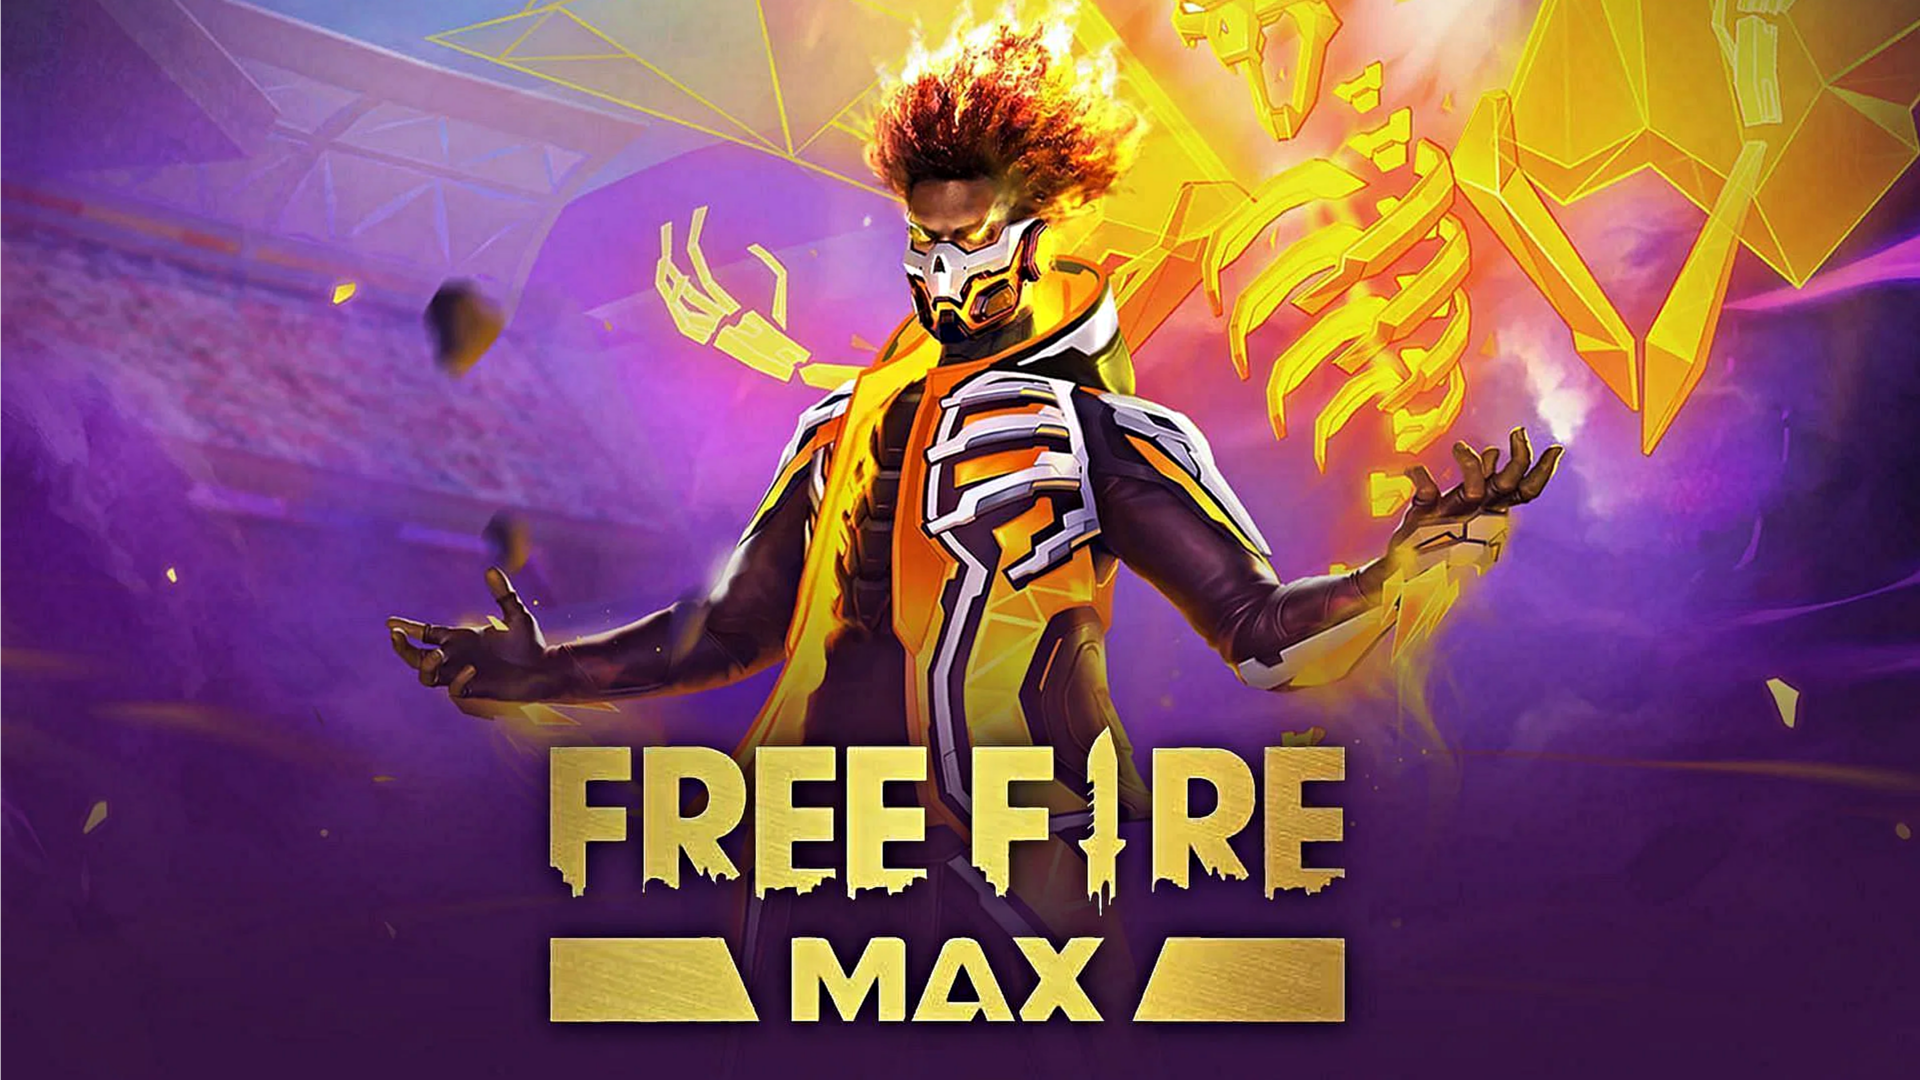 Free Fire MAX codes for April 21: How to redeem